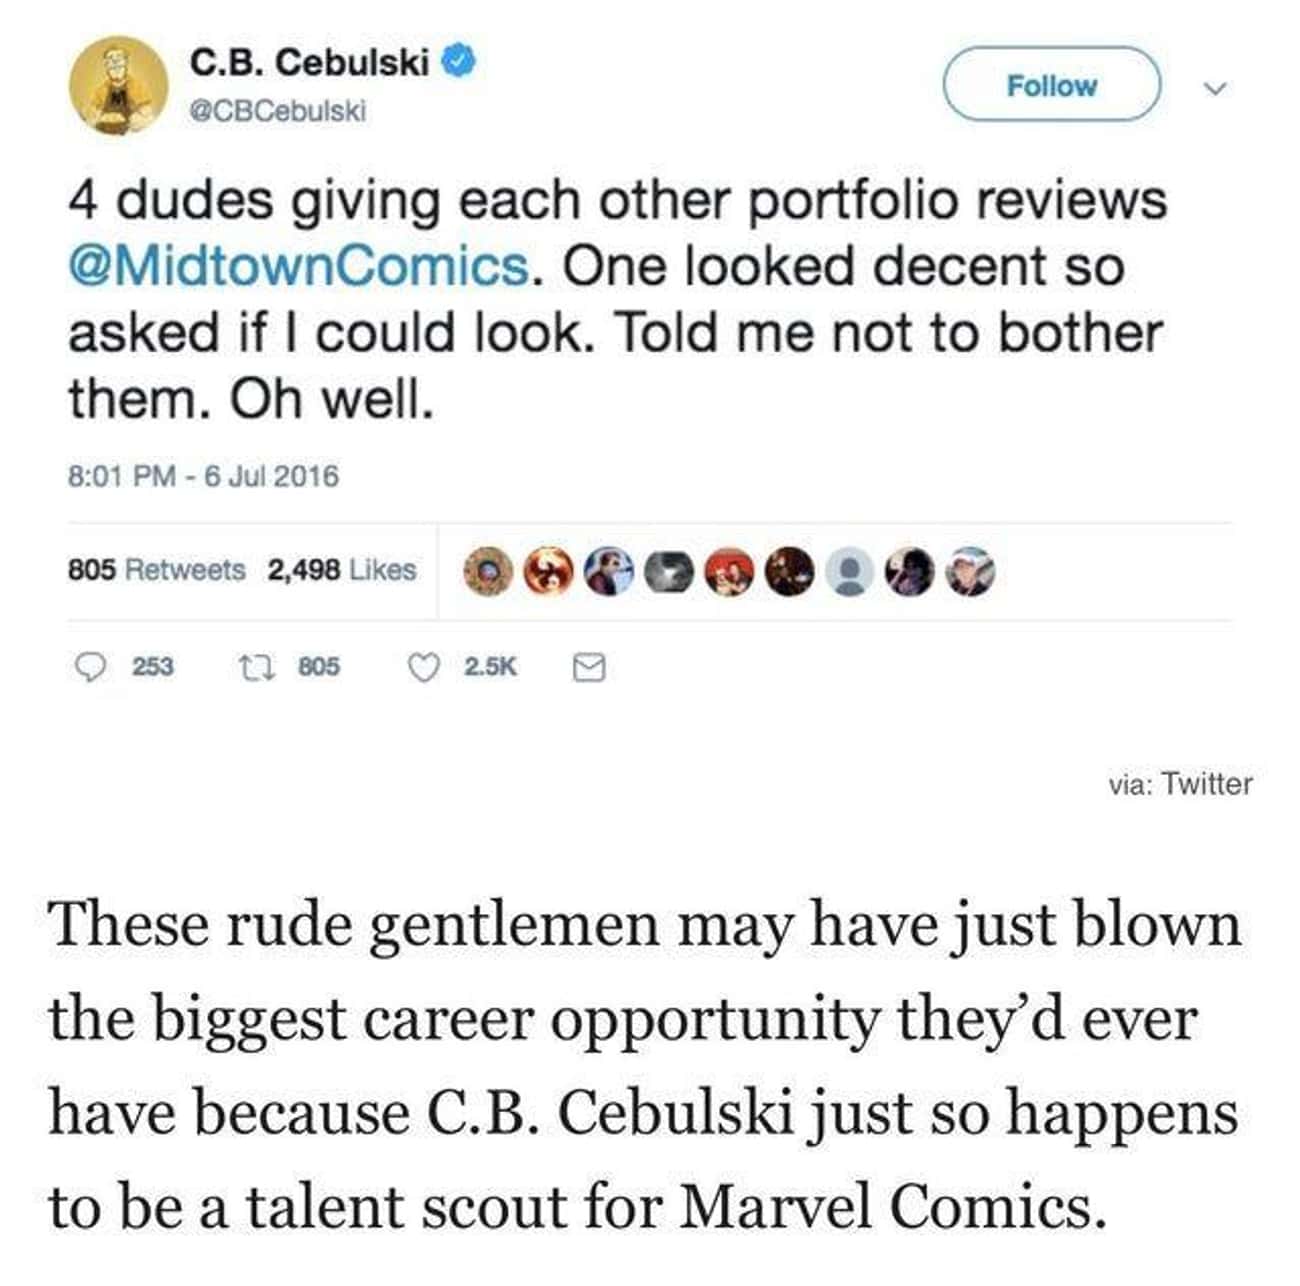 Didn't Know He Was A Talent Scout For Marvel